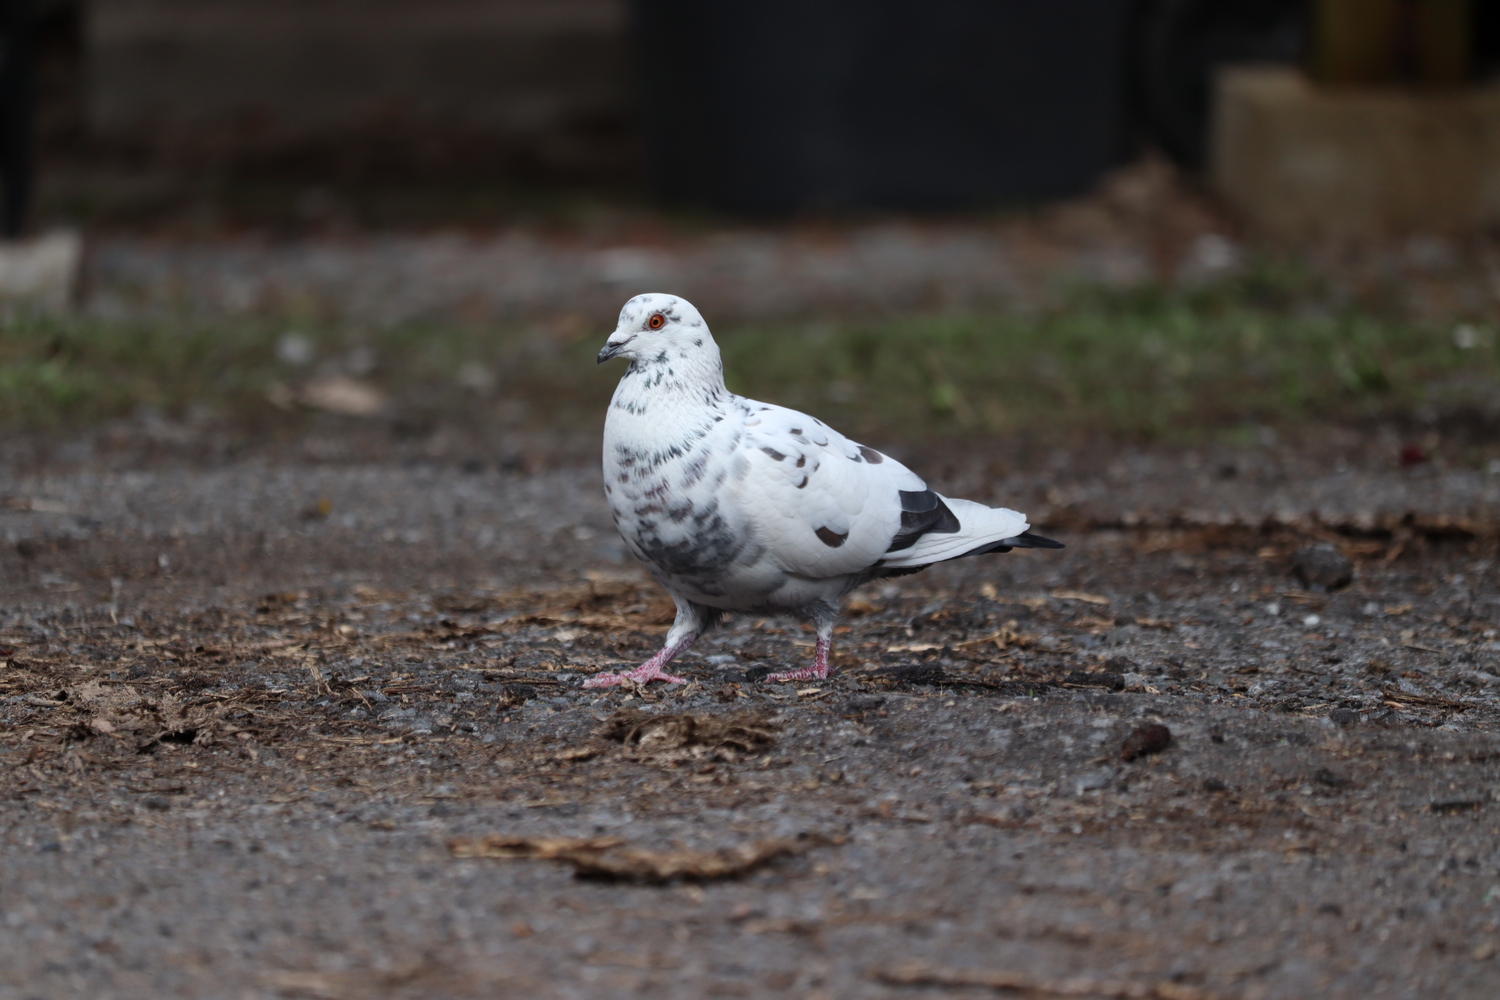 a white pigeon walking in a paved alley.
its visible eye is a beautiful dark orange,
slightly lighter around its pupil.
its mostly white plumage
is dotted here and there by darker feathers,
and its tail feathers in particular are dark.
there's a hint of small green feathers
around its neck.